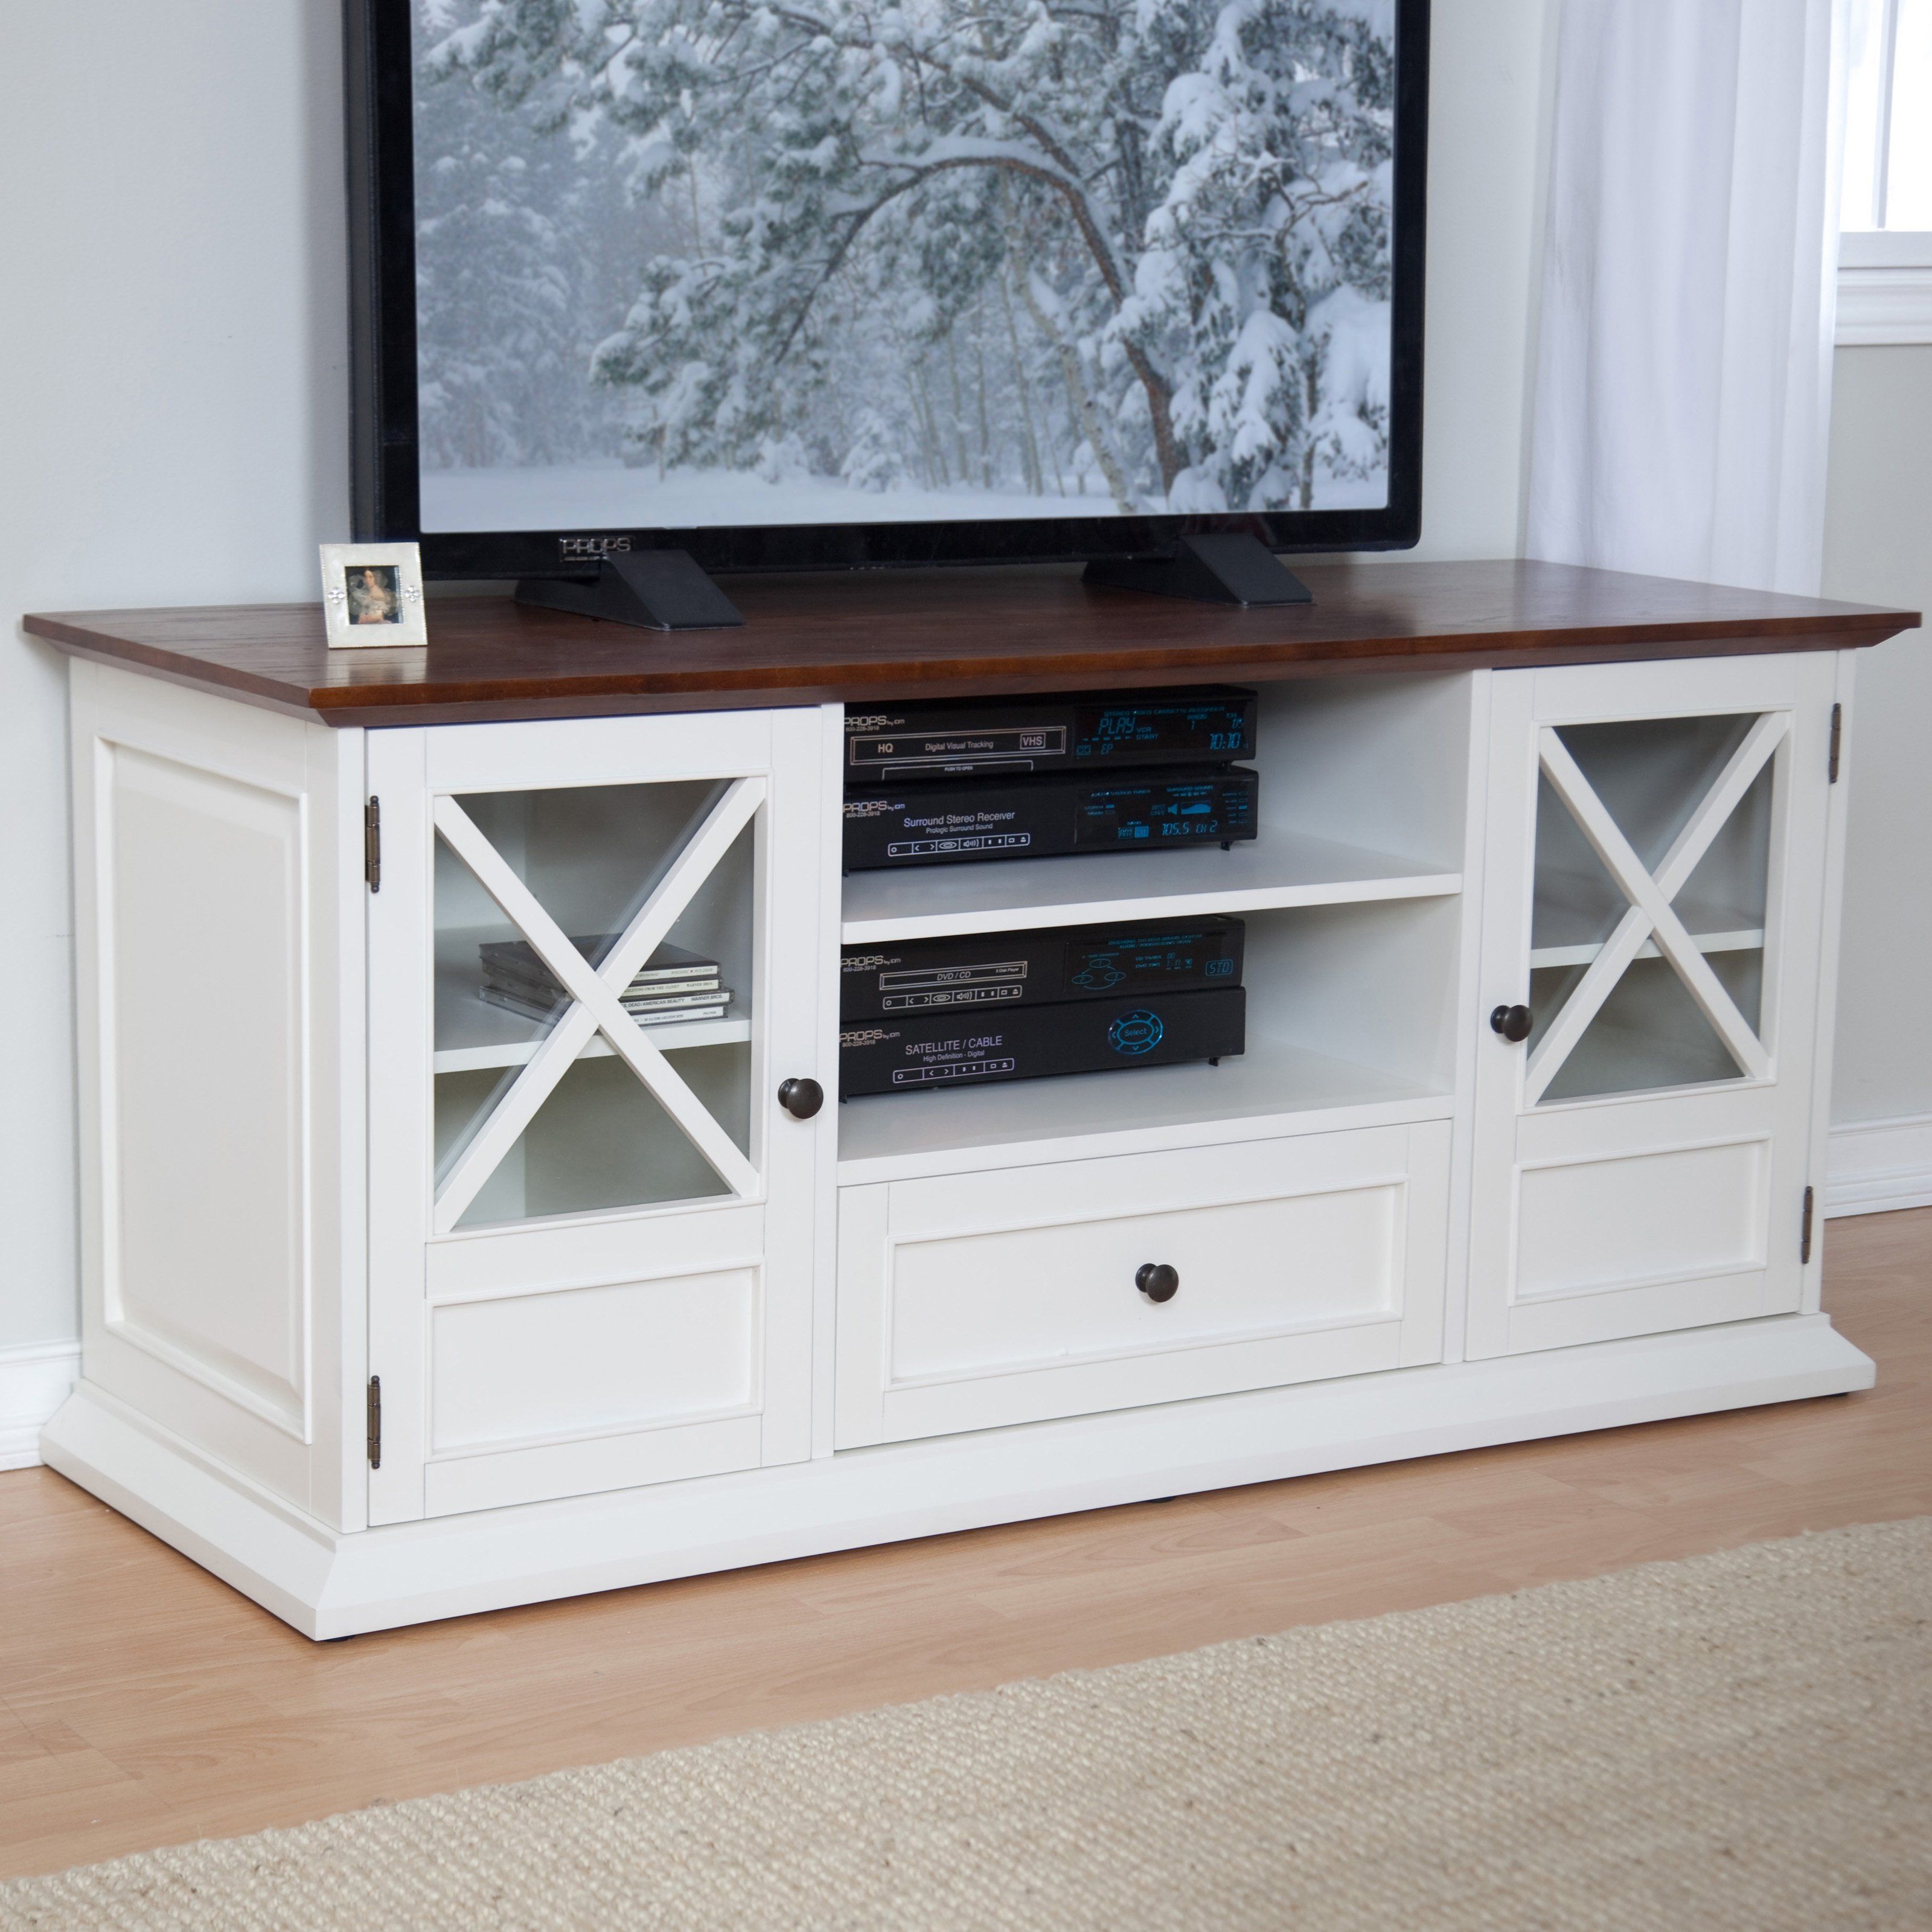 Dazzling Jofran Craftsman Tv Stand Media Unit Distressed Cream Pertaining To Oxford 70 Inch Tv Stands (View 7 of 30)